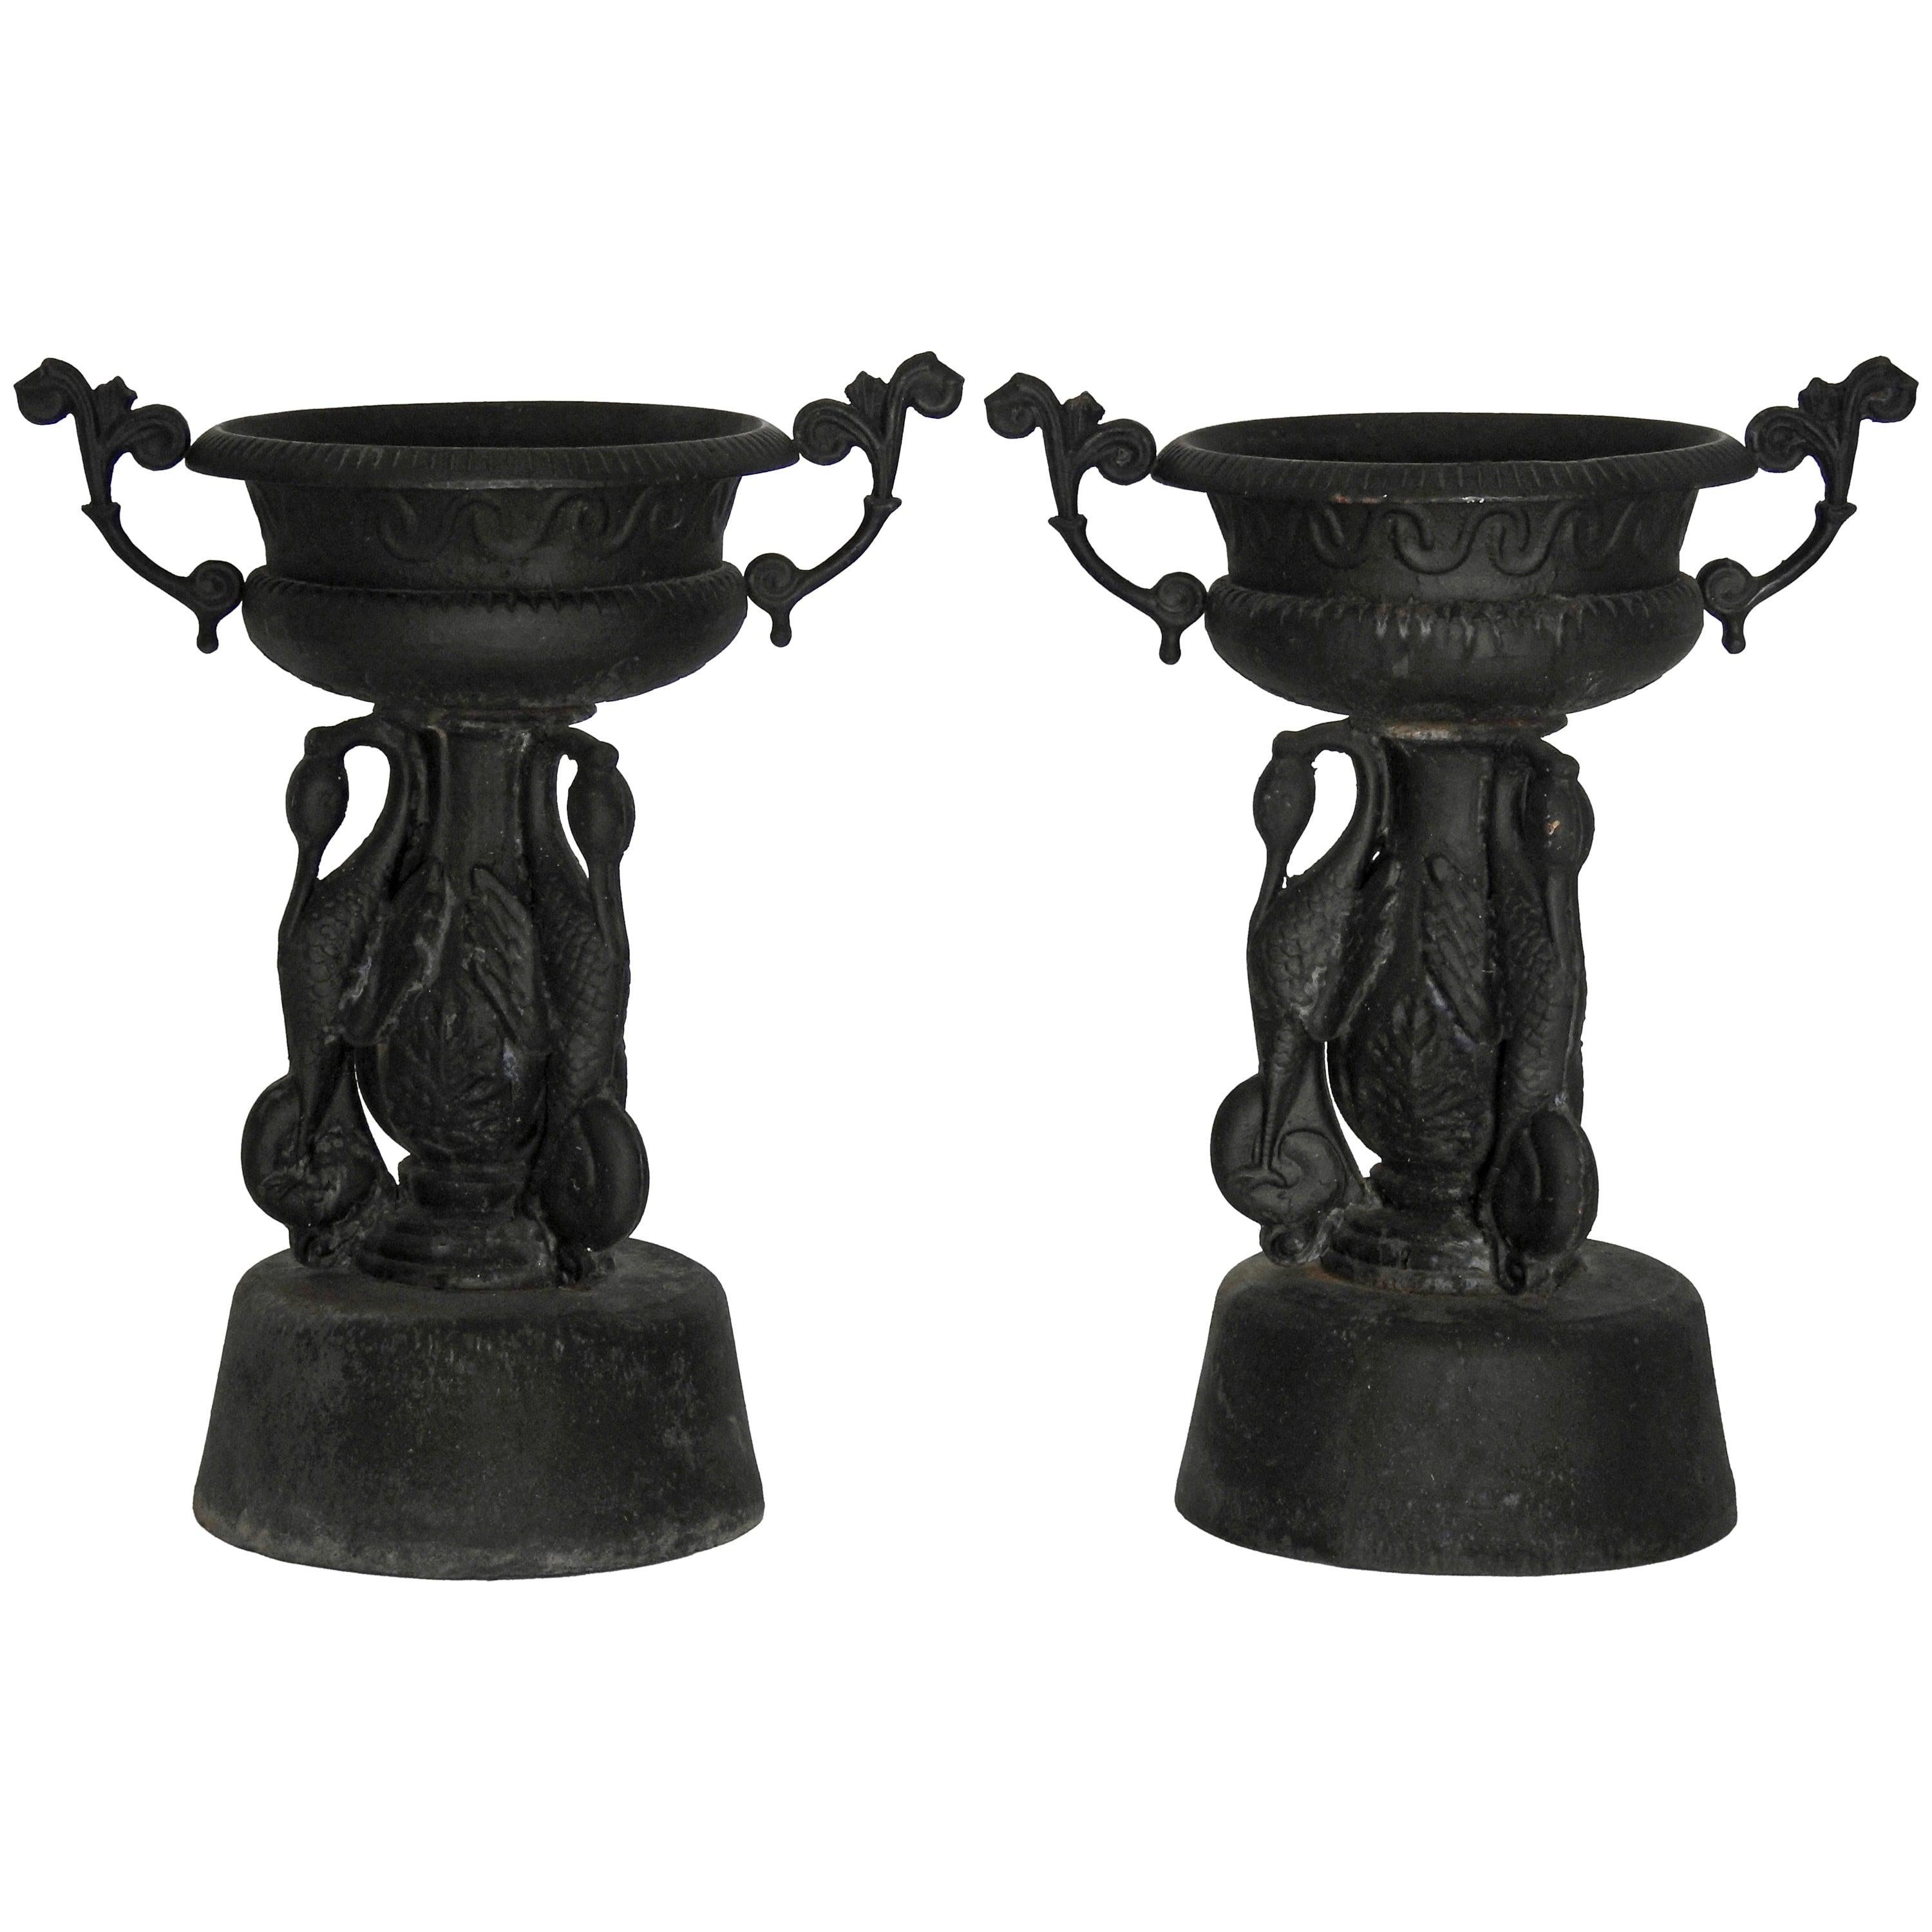 Cast Iron Garden Urns with Cranes For Sale